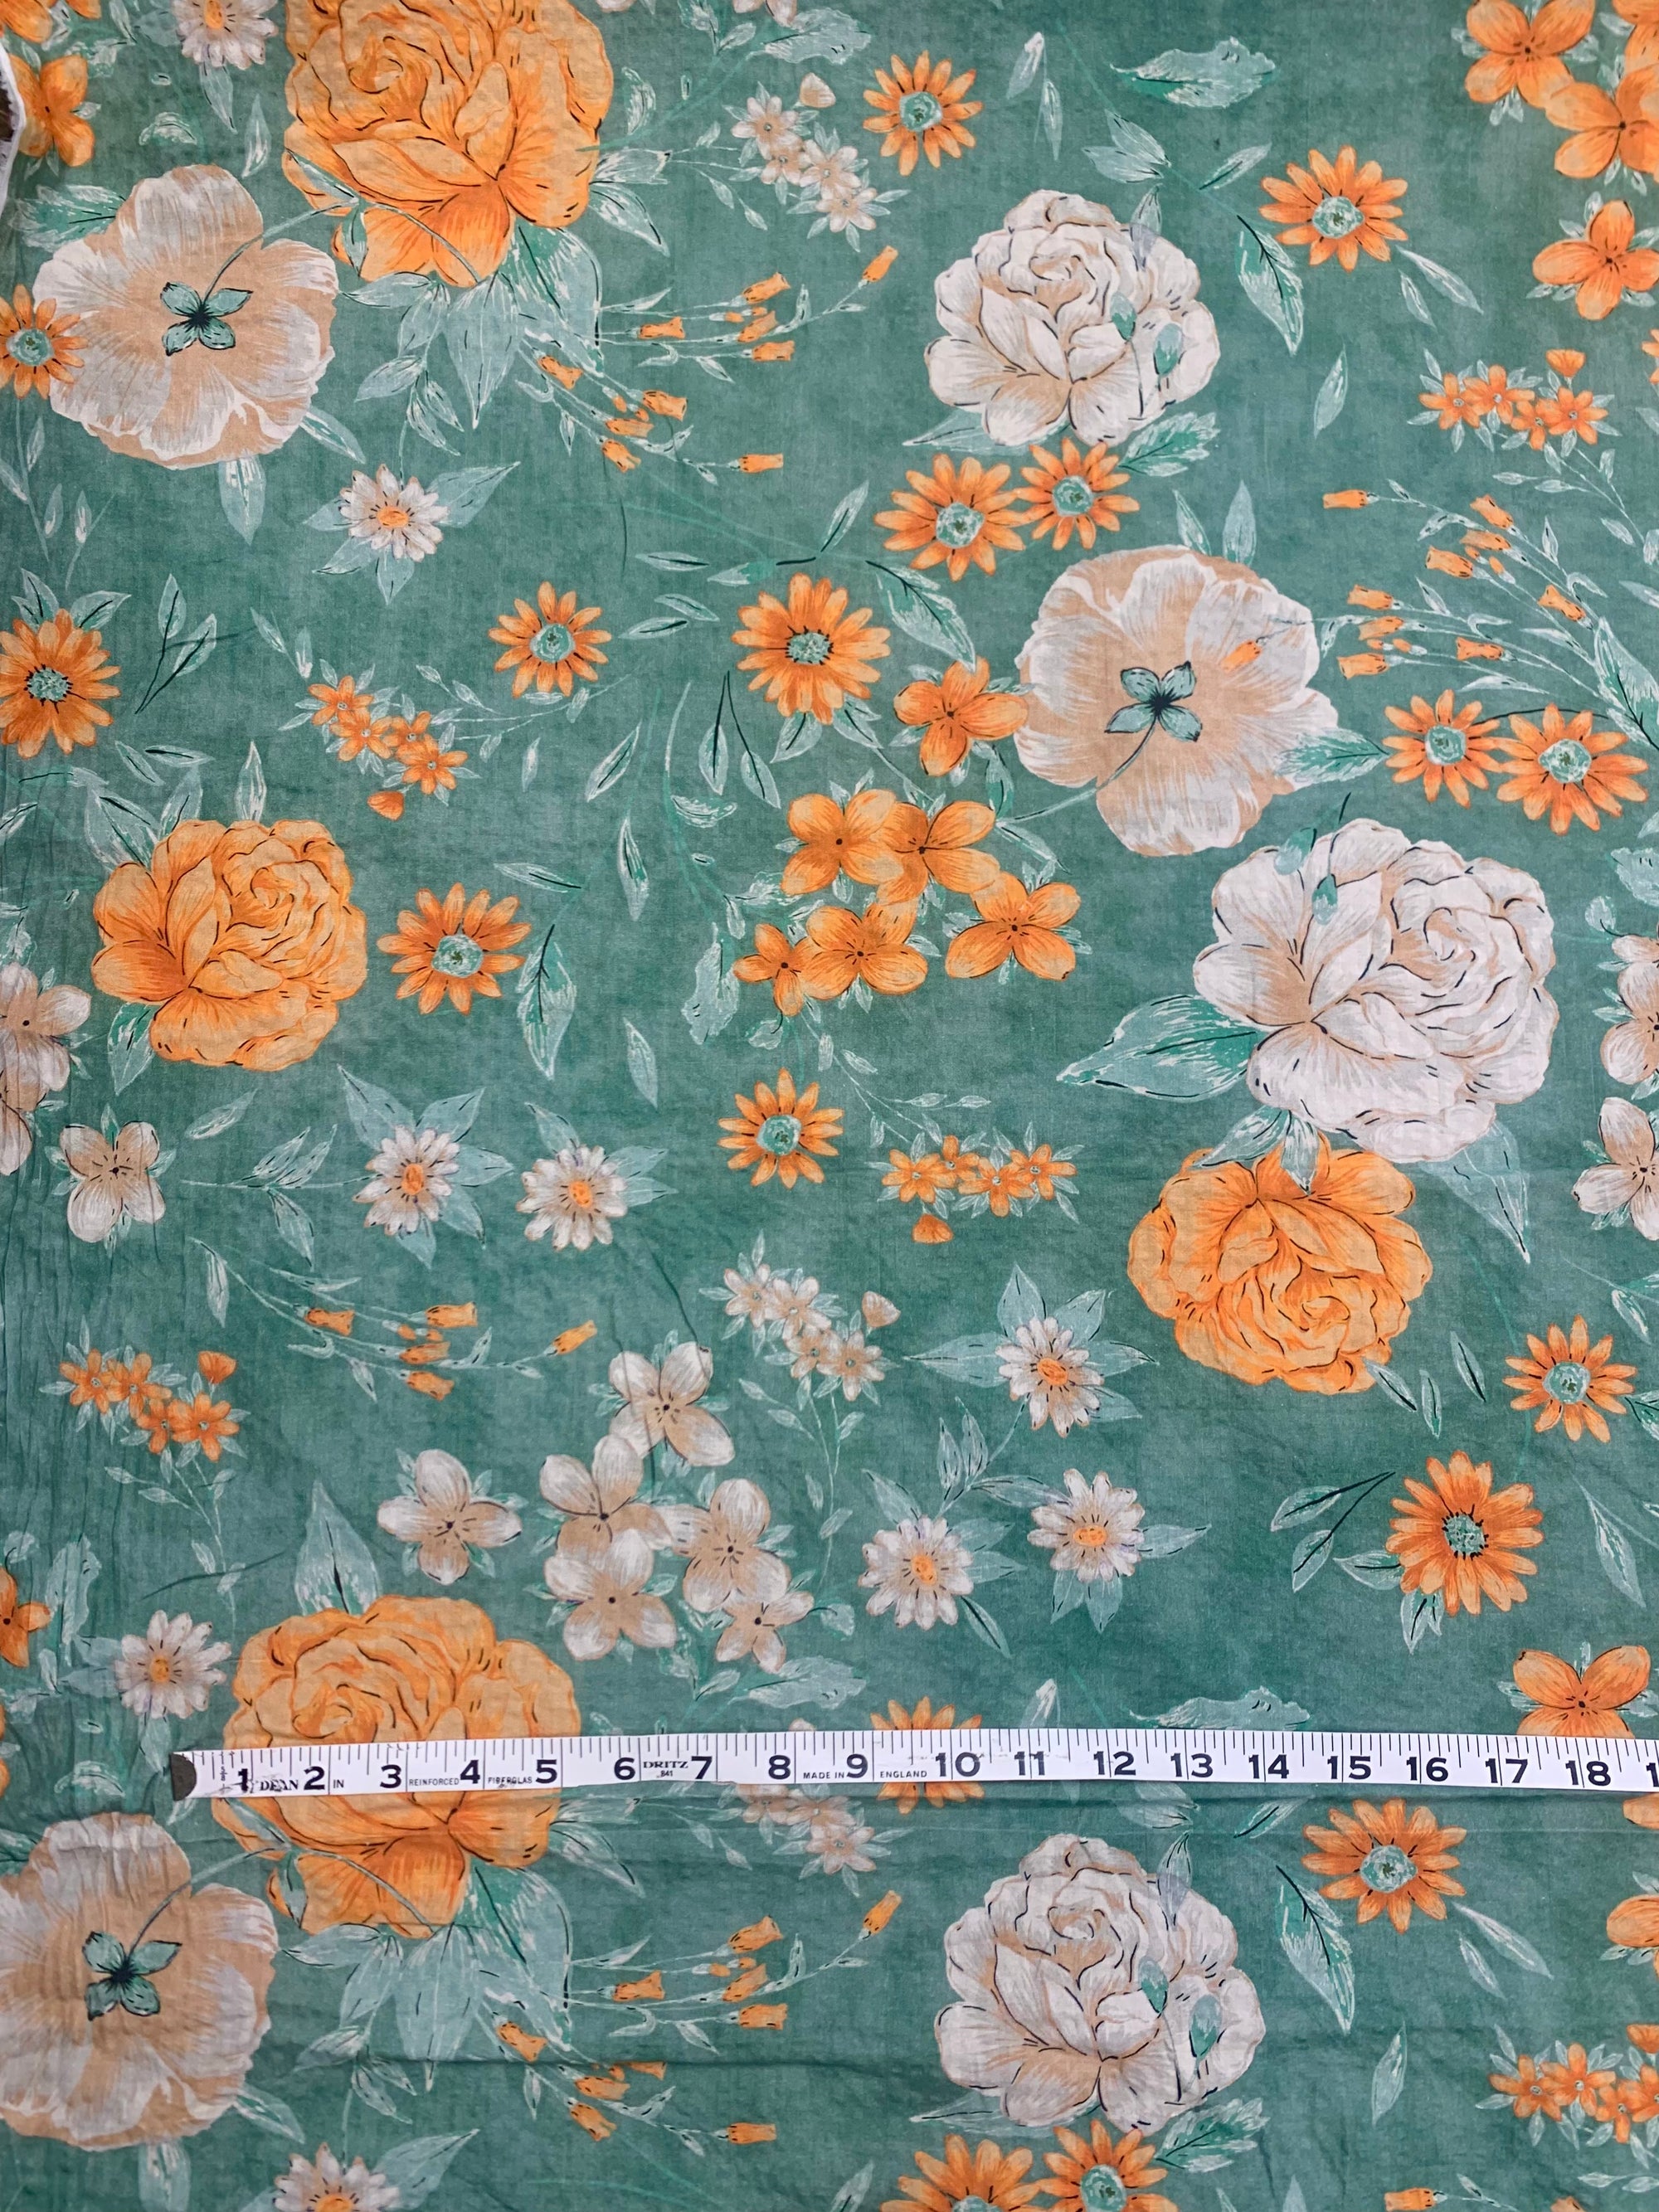 close up of flat cotton seersucker with a muted green, orange and white floral print